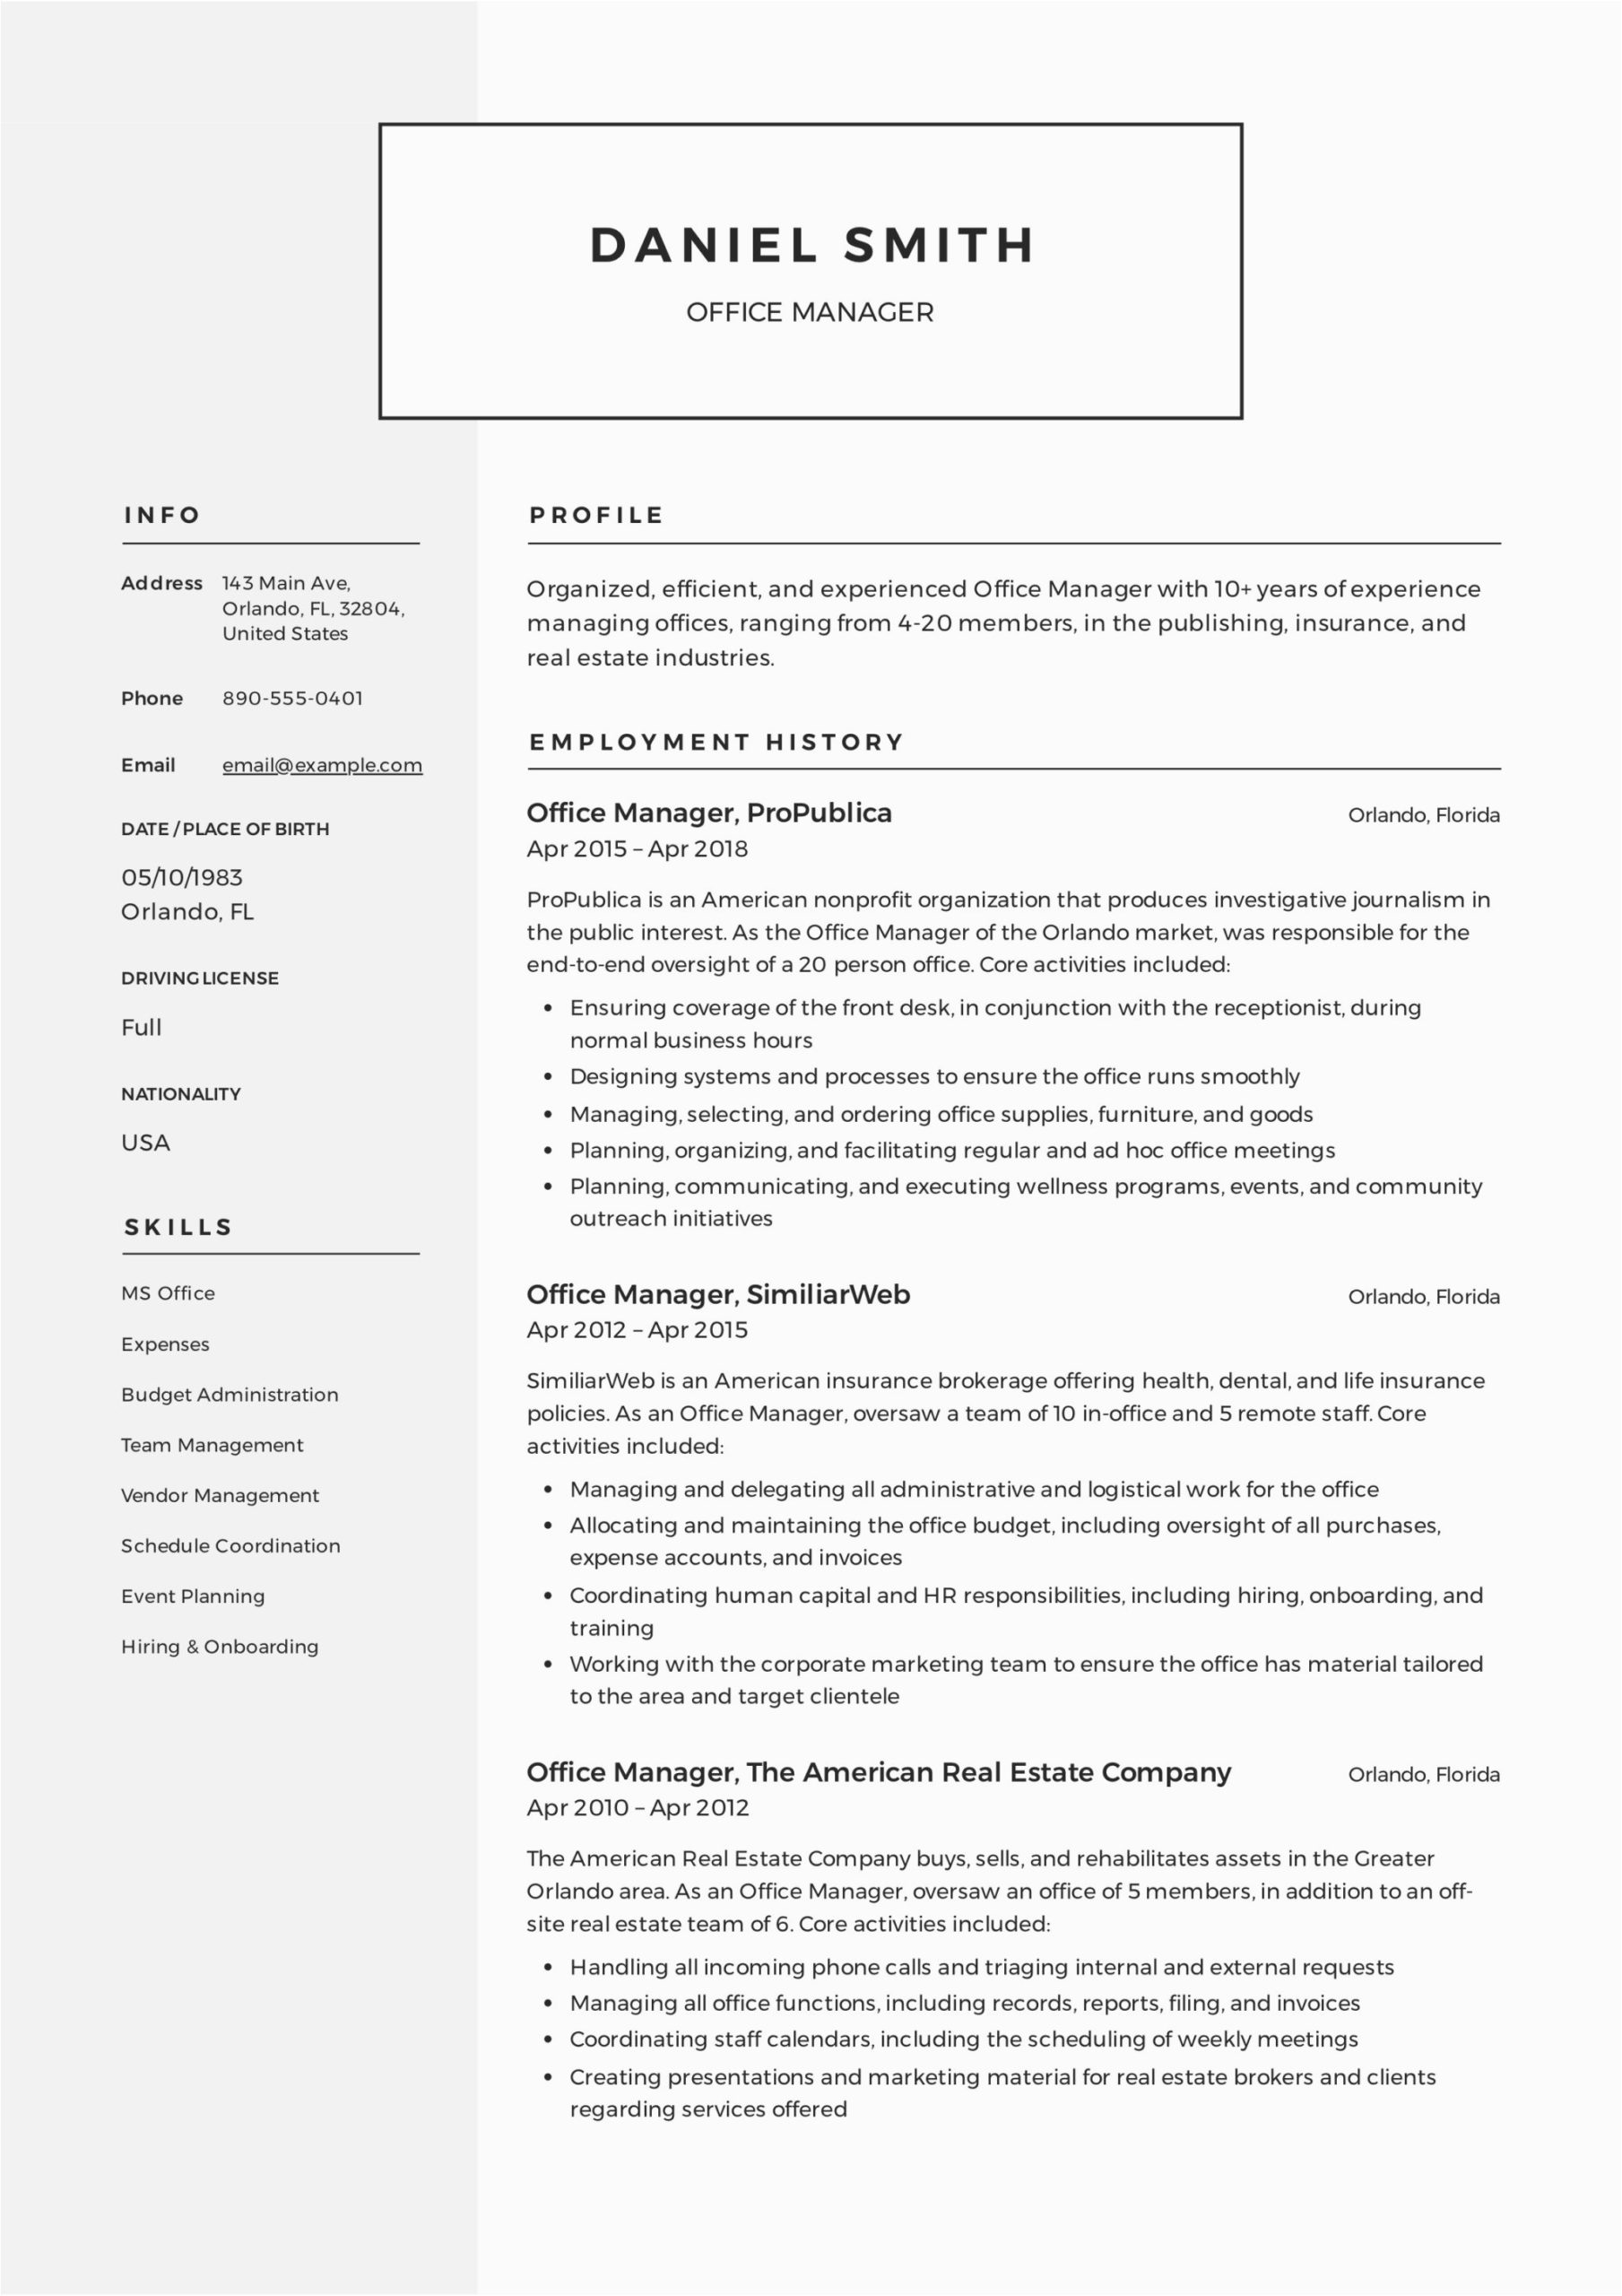 Free Resume Samples for Office Manager Guide Fice Manager Resume [ 12 Samples ] Pdf